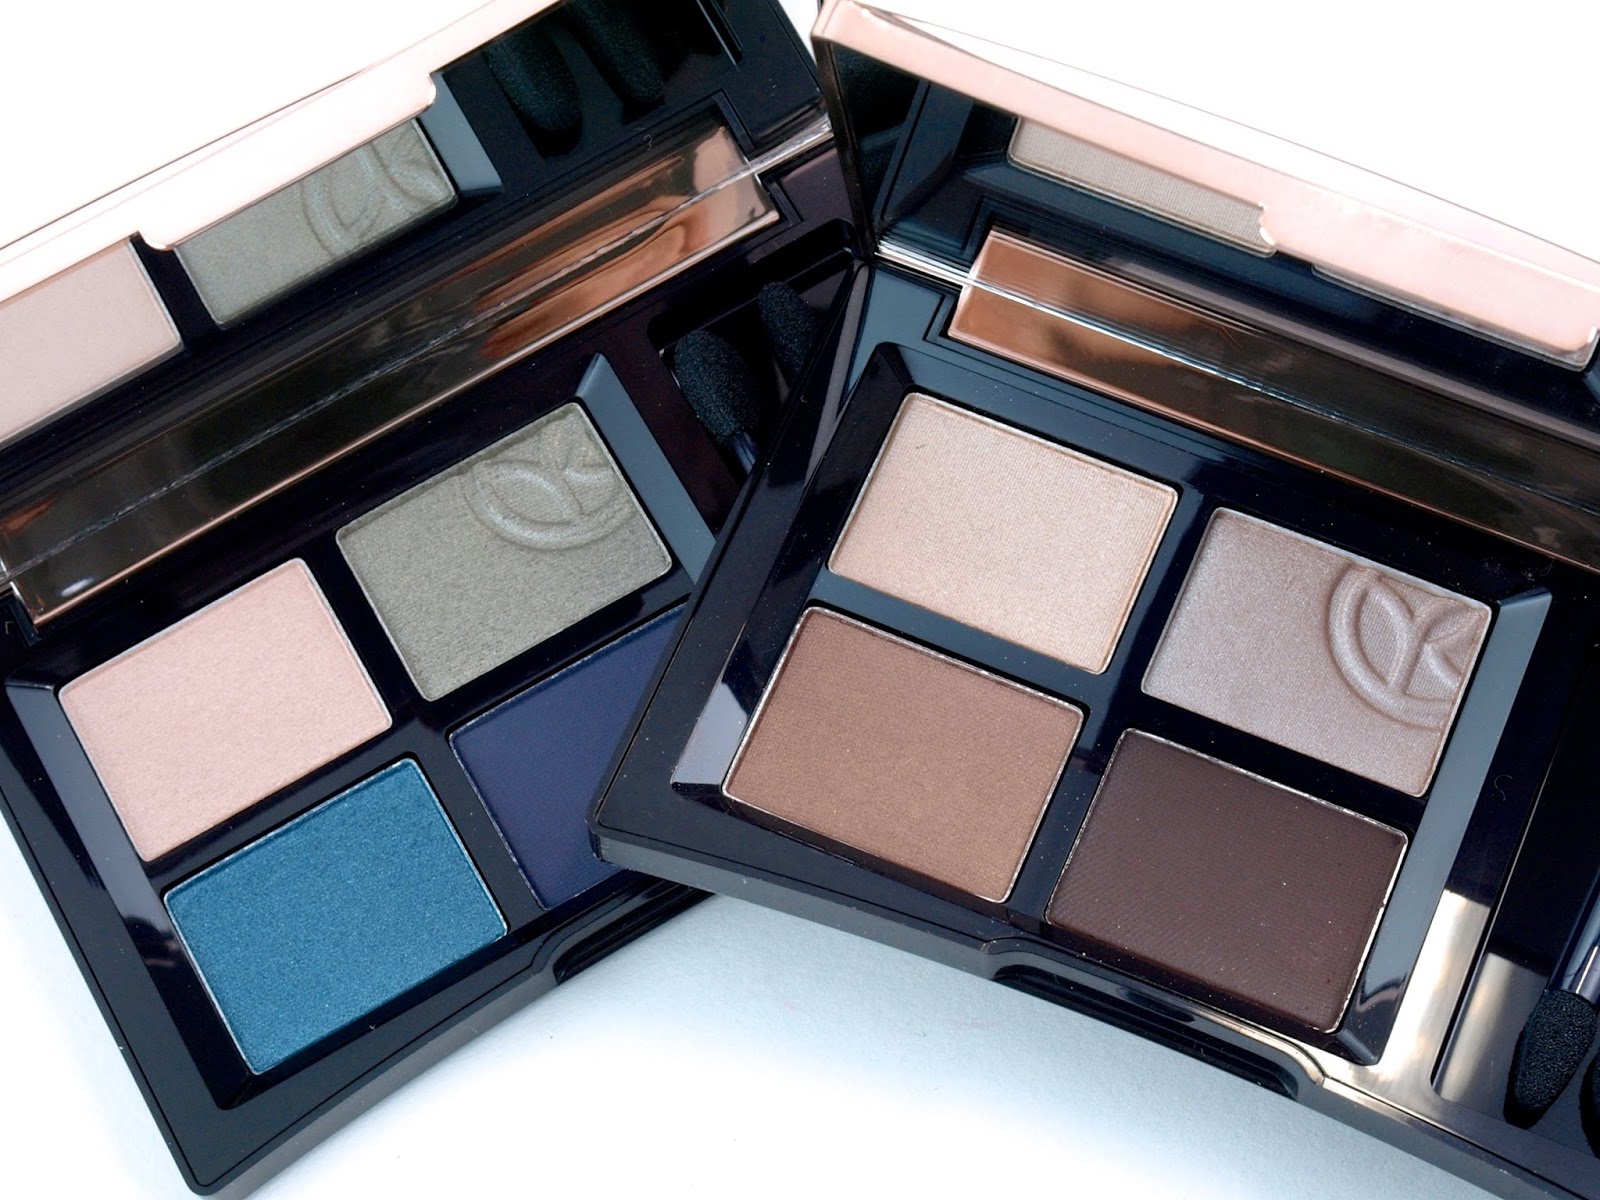 Yves Rocher Quad Eyeshadow Sumptuous Color: Review and Swatches